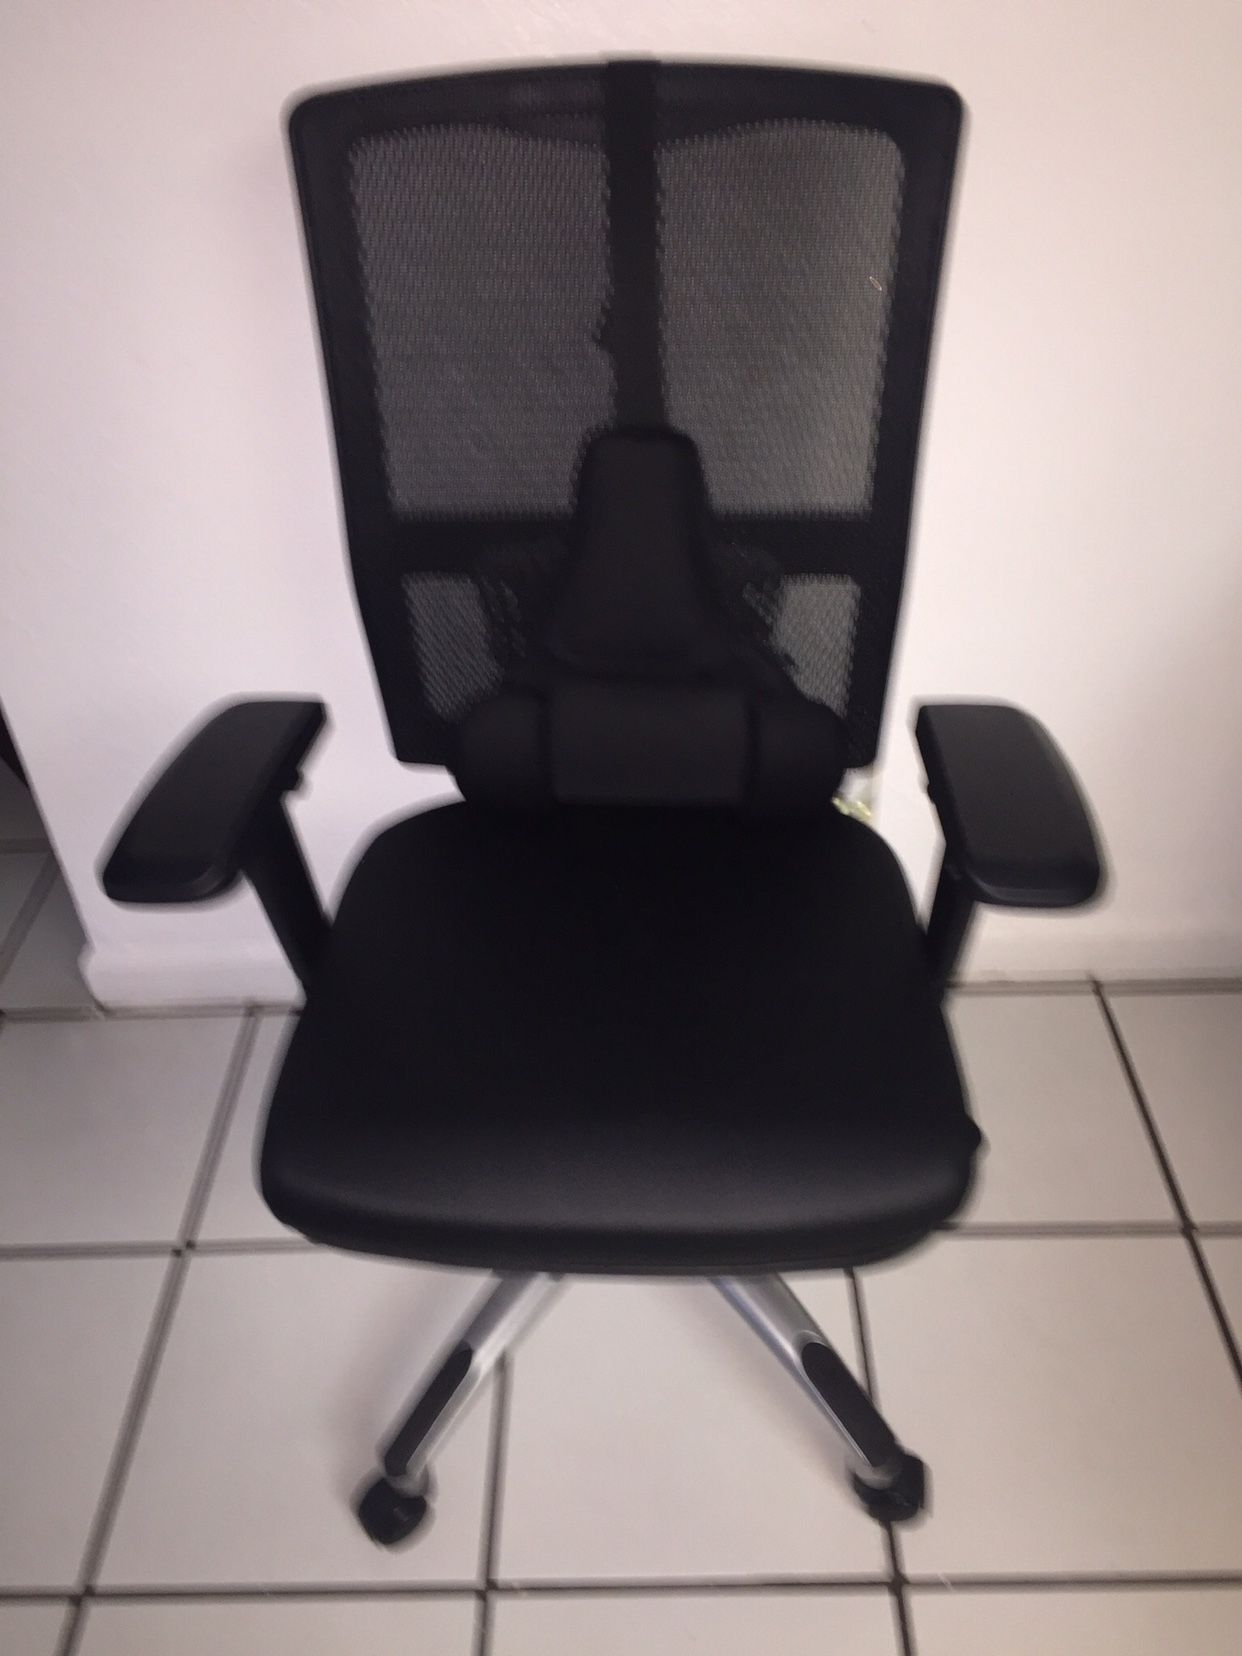 Very Elegant Executive Office Chair $ 150 for the purchase Fellowes Microban gift for the chair...